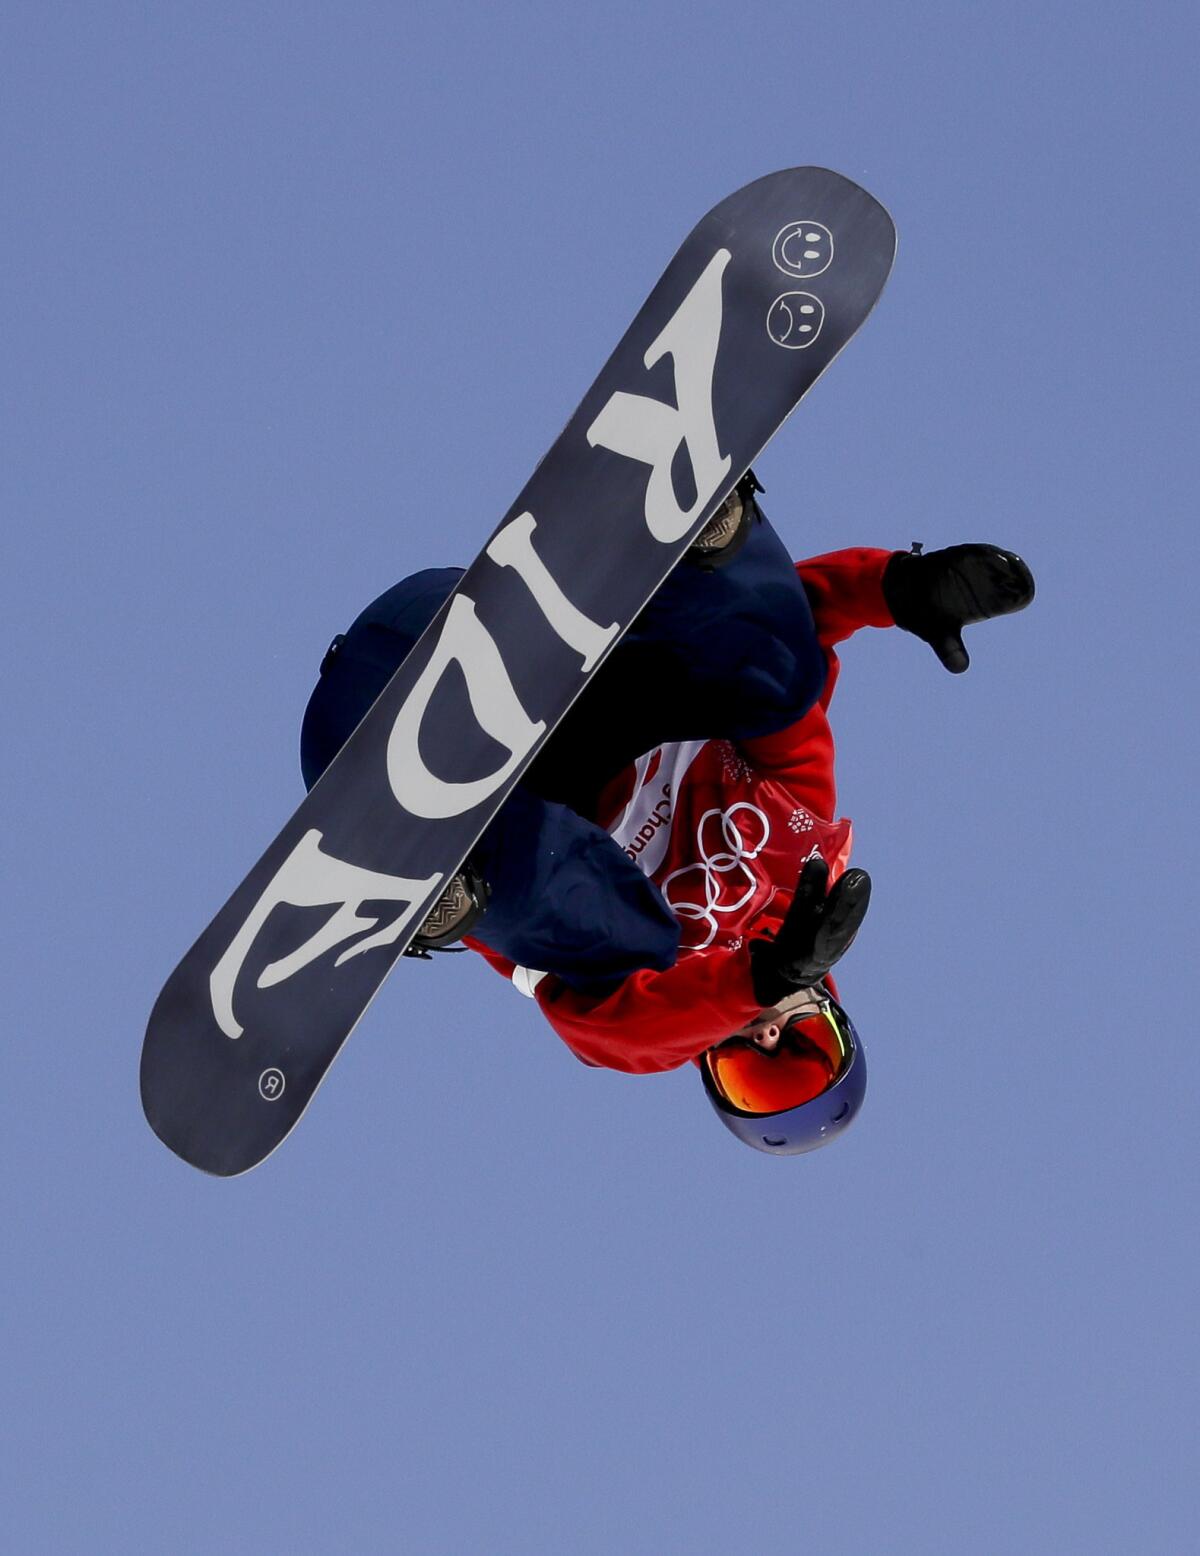 Billy Morgan of Britain jumps in the men's big air snowboard qualification competition at the 2018 Winter Olympics in Pyeongchang. (Kirsty Wigglesworth / AP)